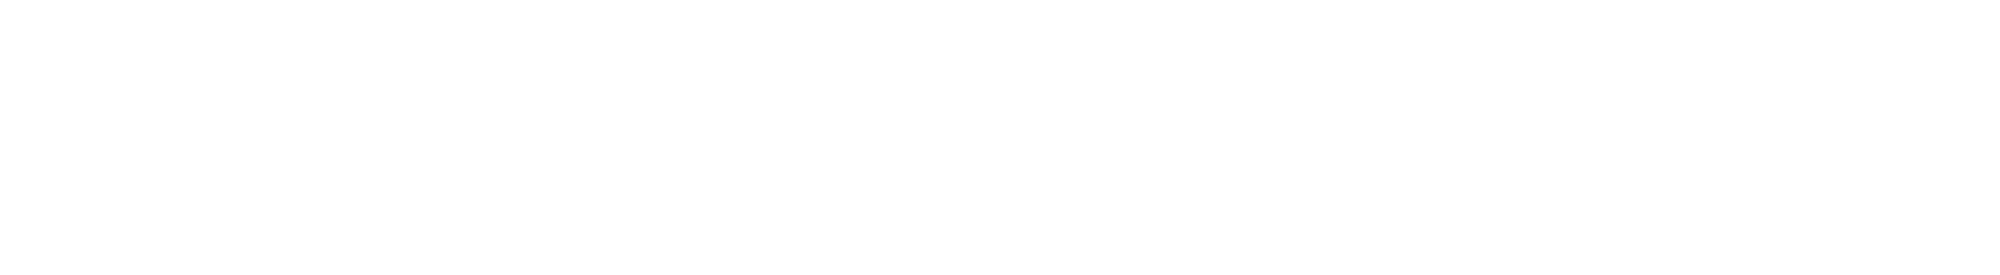 Massachusetts AI & Technology Center for Connected Care in Aging & Alzheimer's Diease